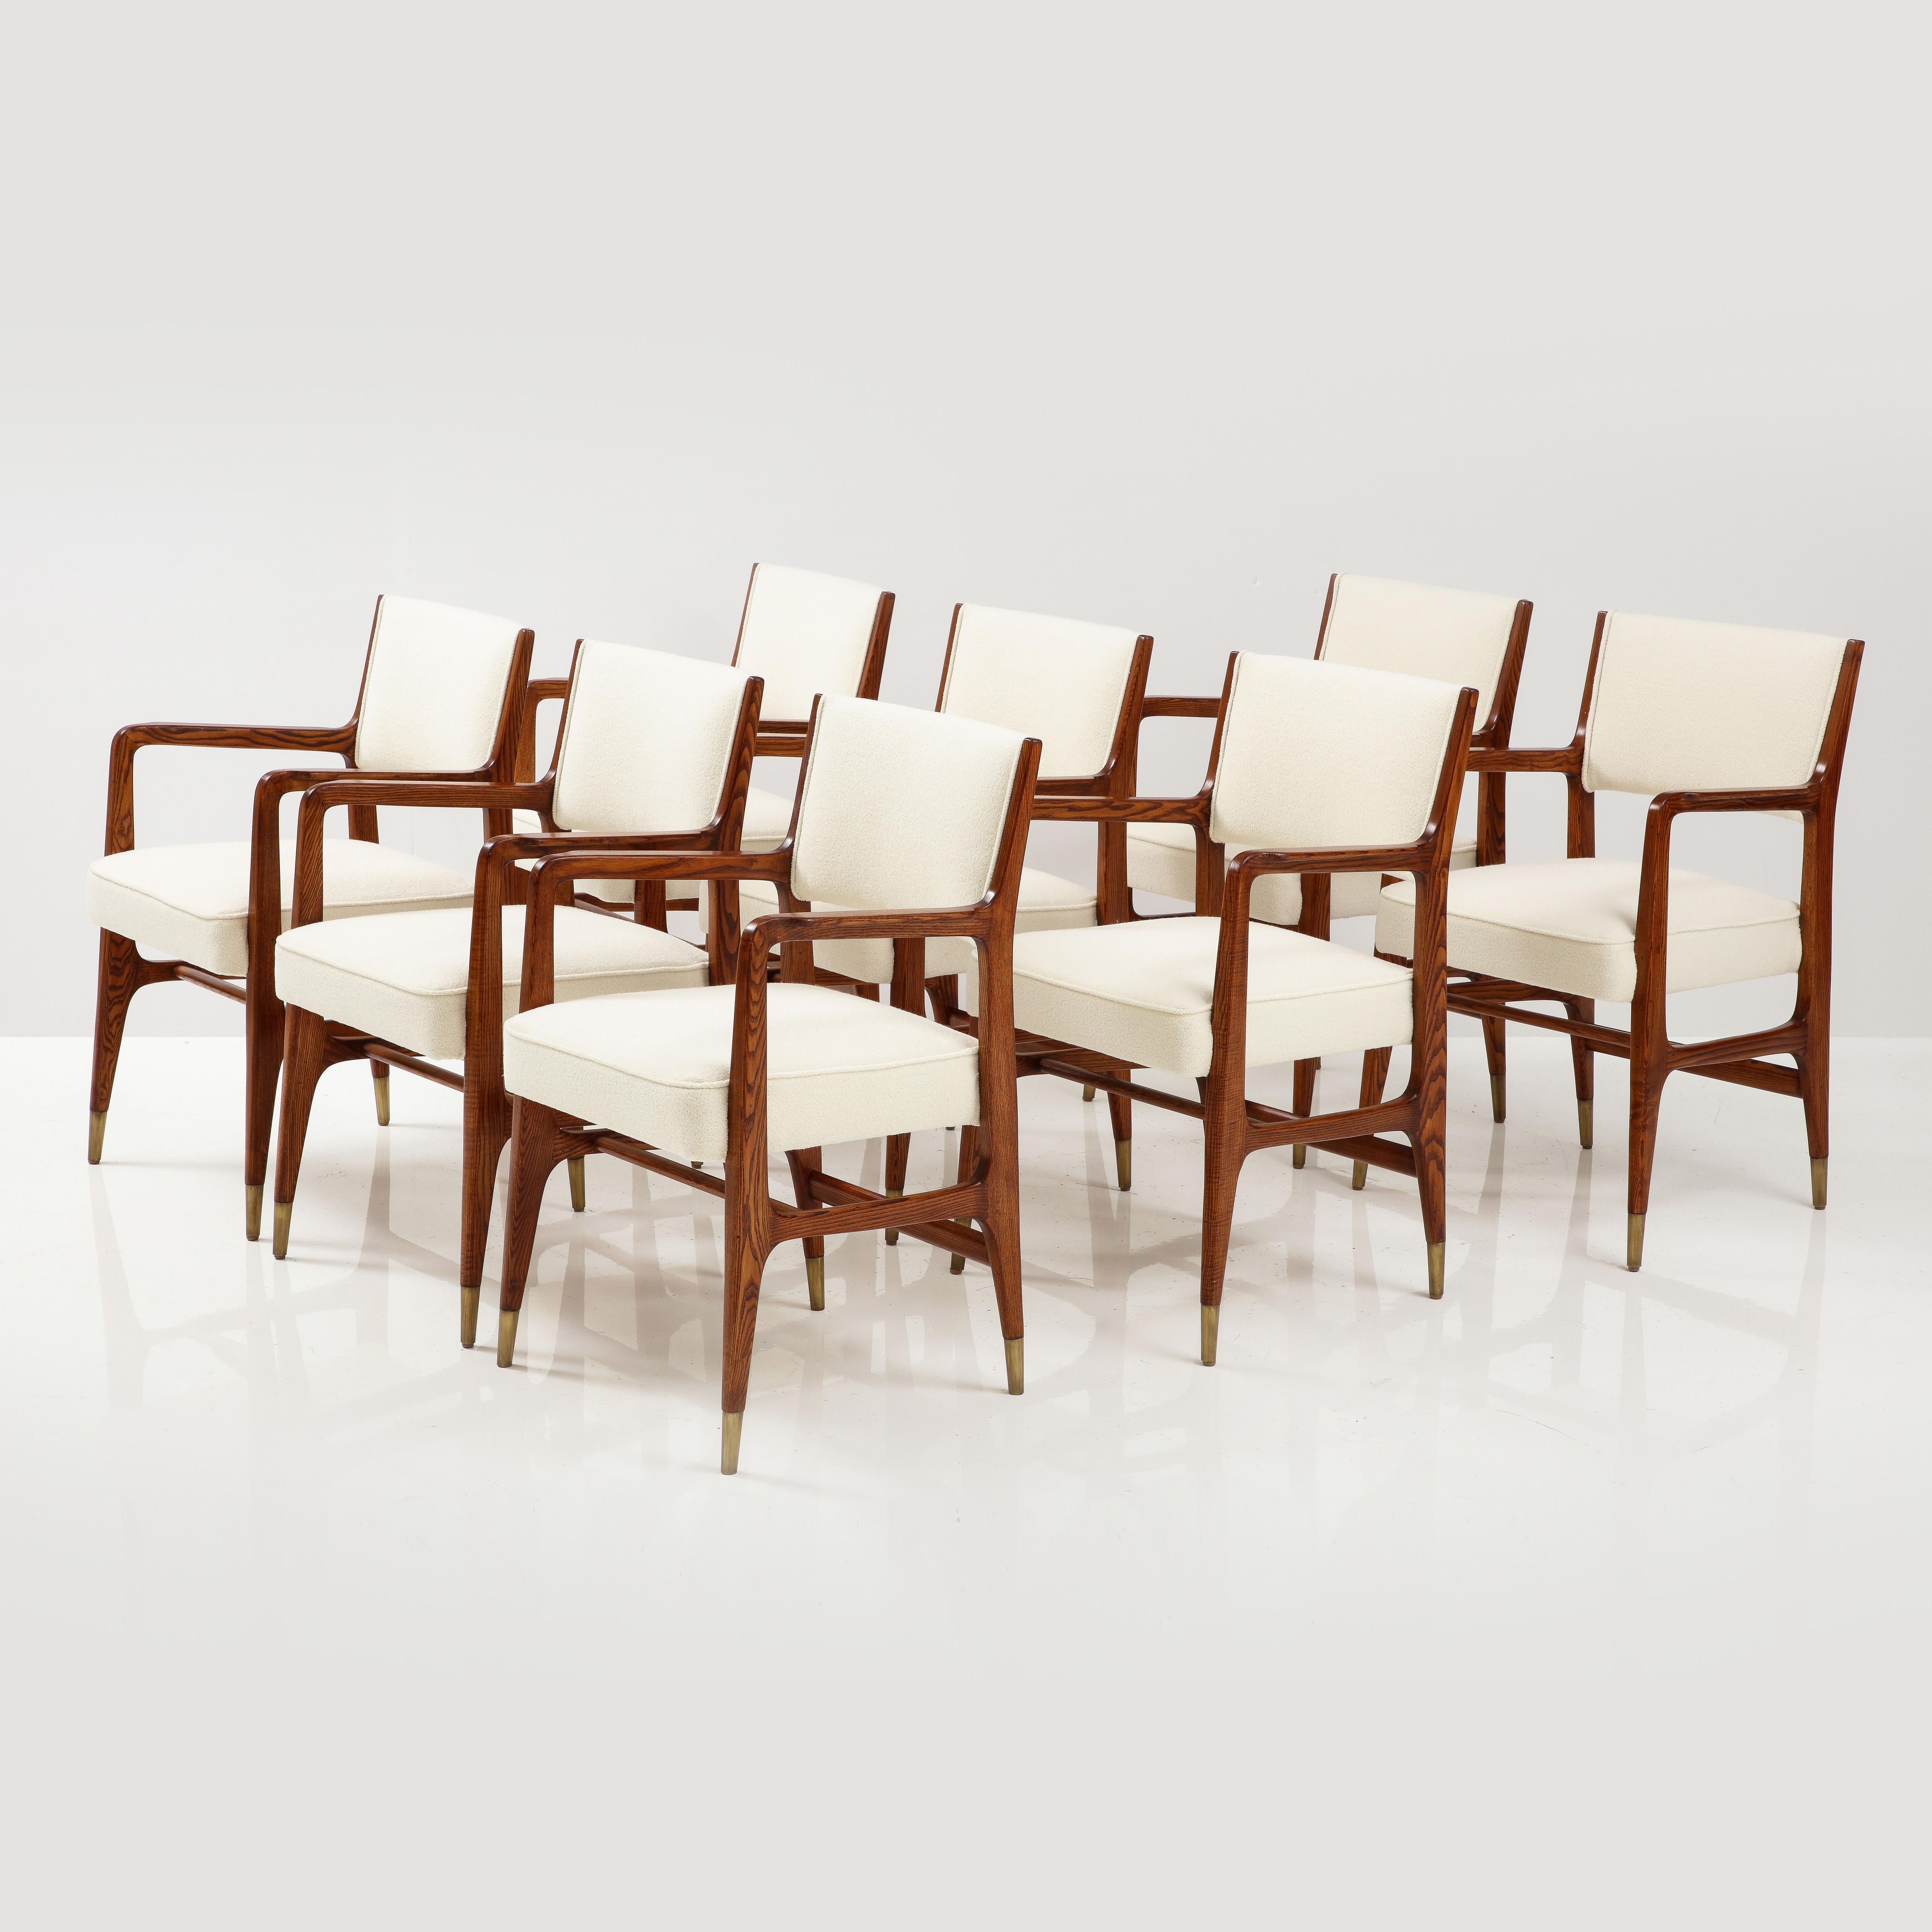 Gio Ponti for Cassina rare set of 8 dining chairs model 110 with red oak frames, upholstered seat and back in ivory bouclé, and ending in brass sabots, Italy, 1950s. These Ponti classic architectural armchairs have sculptural curved armrests,